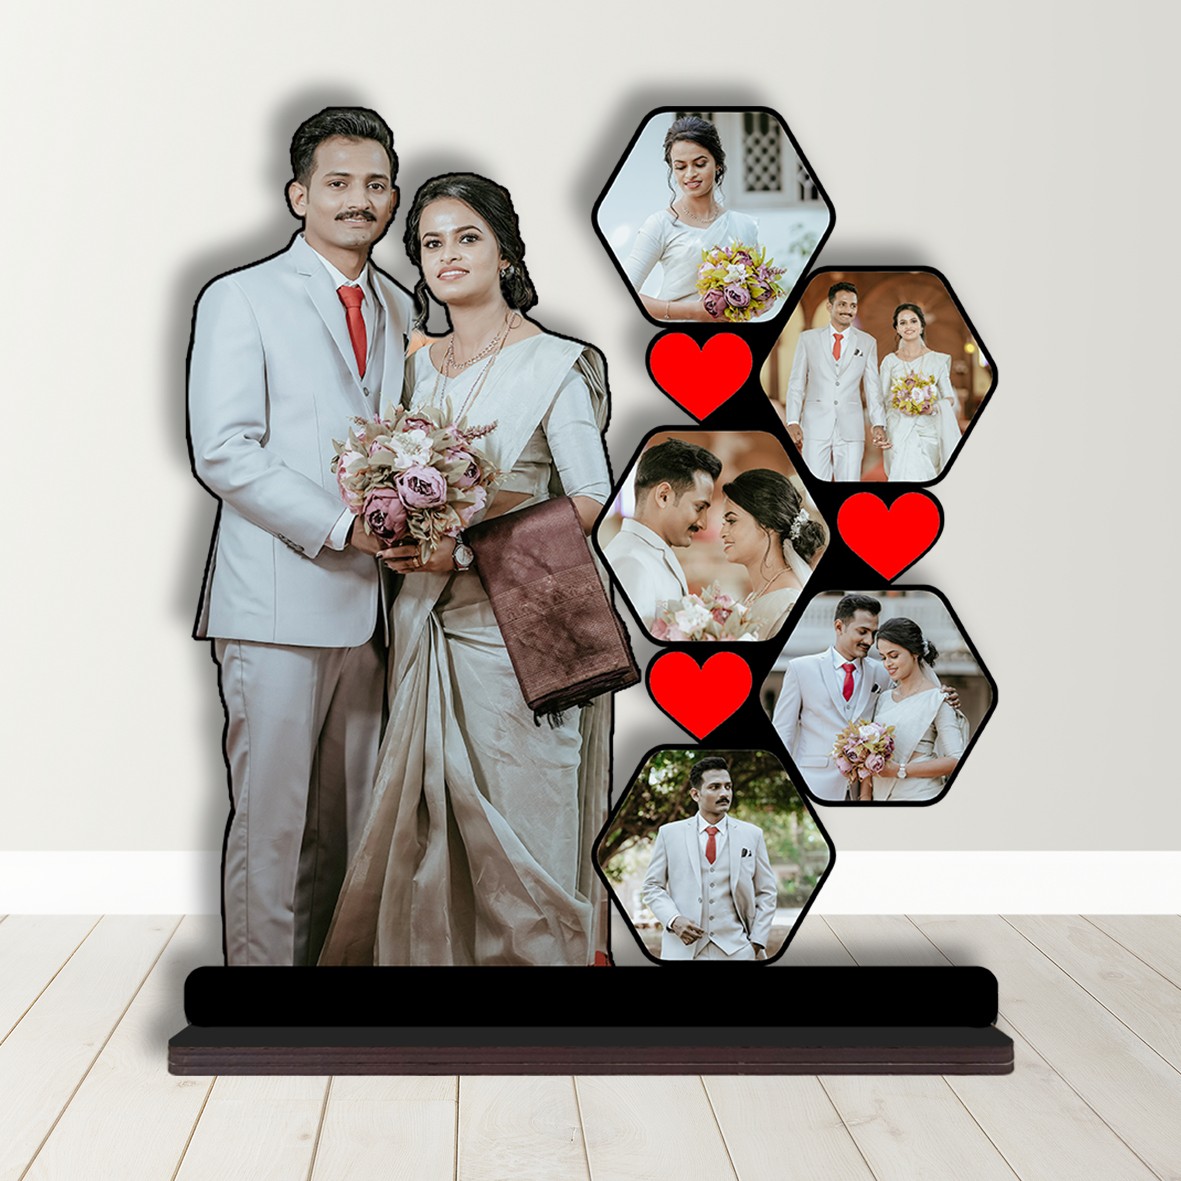 Personalized Photo Cutout Wooden Table Frame (Hexagon Design)